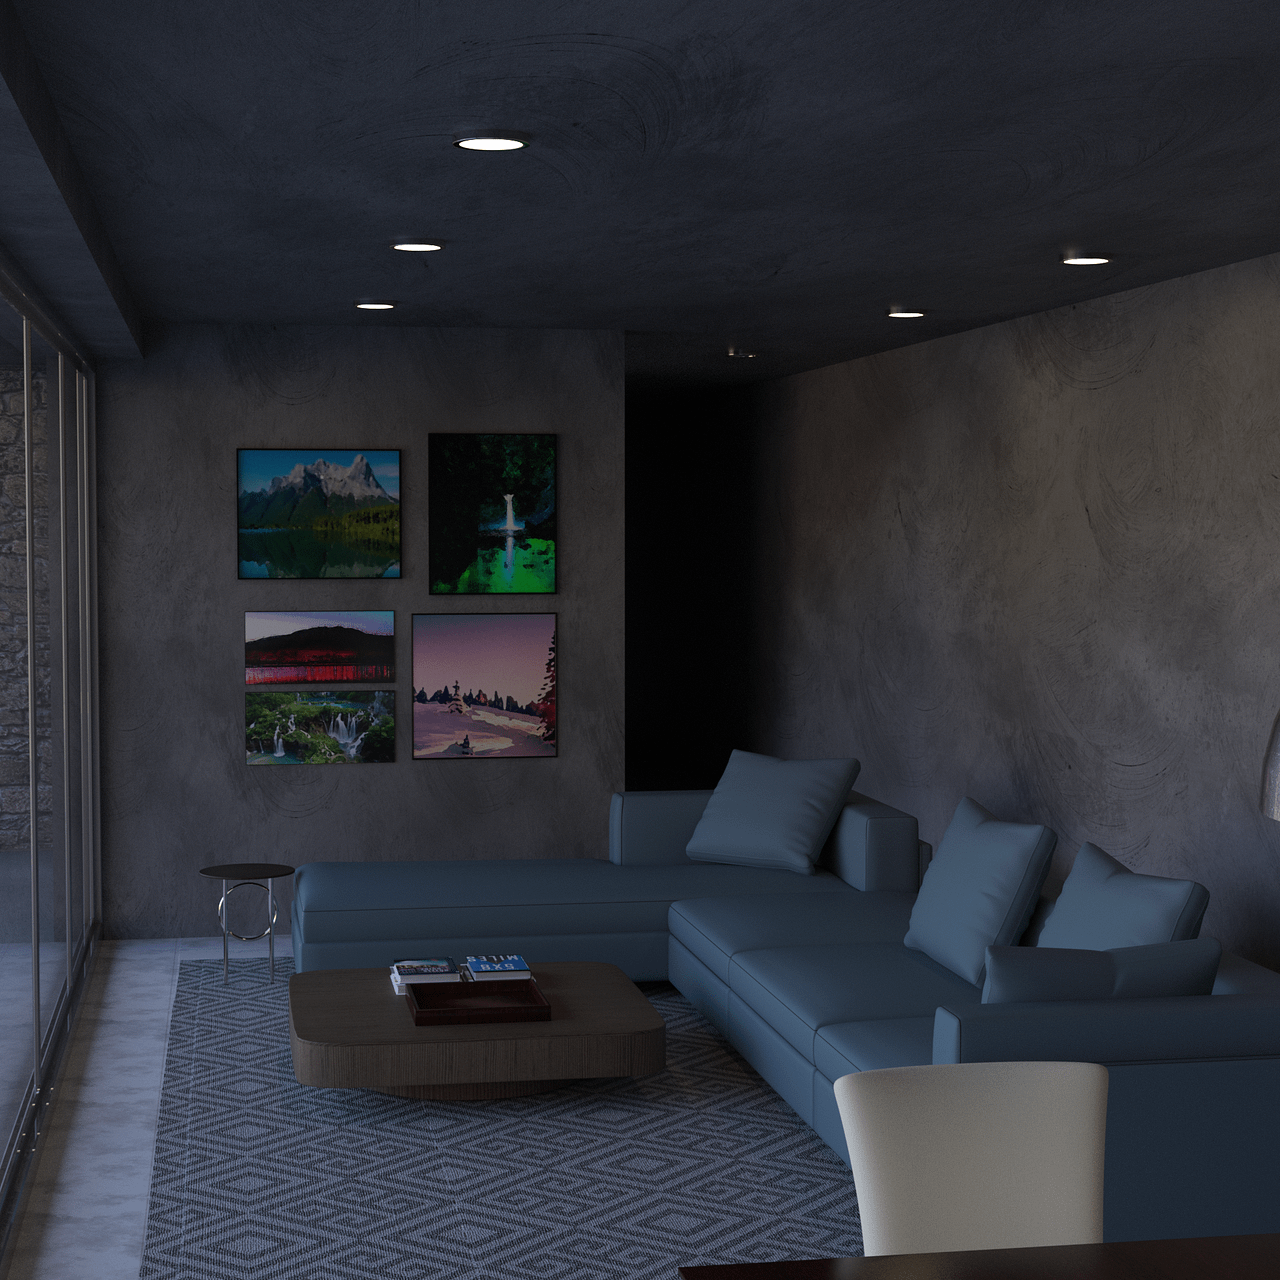 Another rendering of the interior of the villa